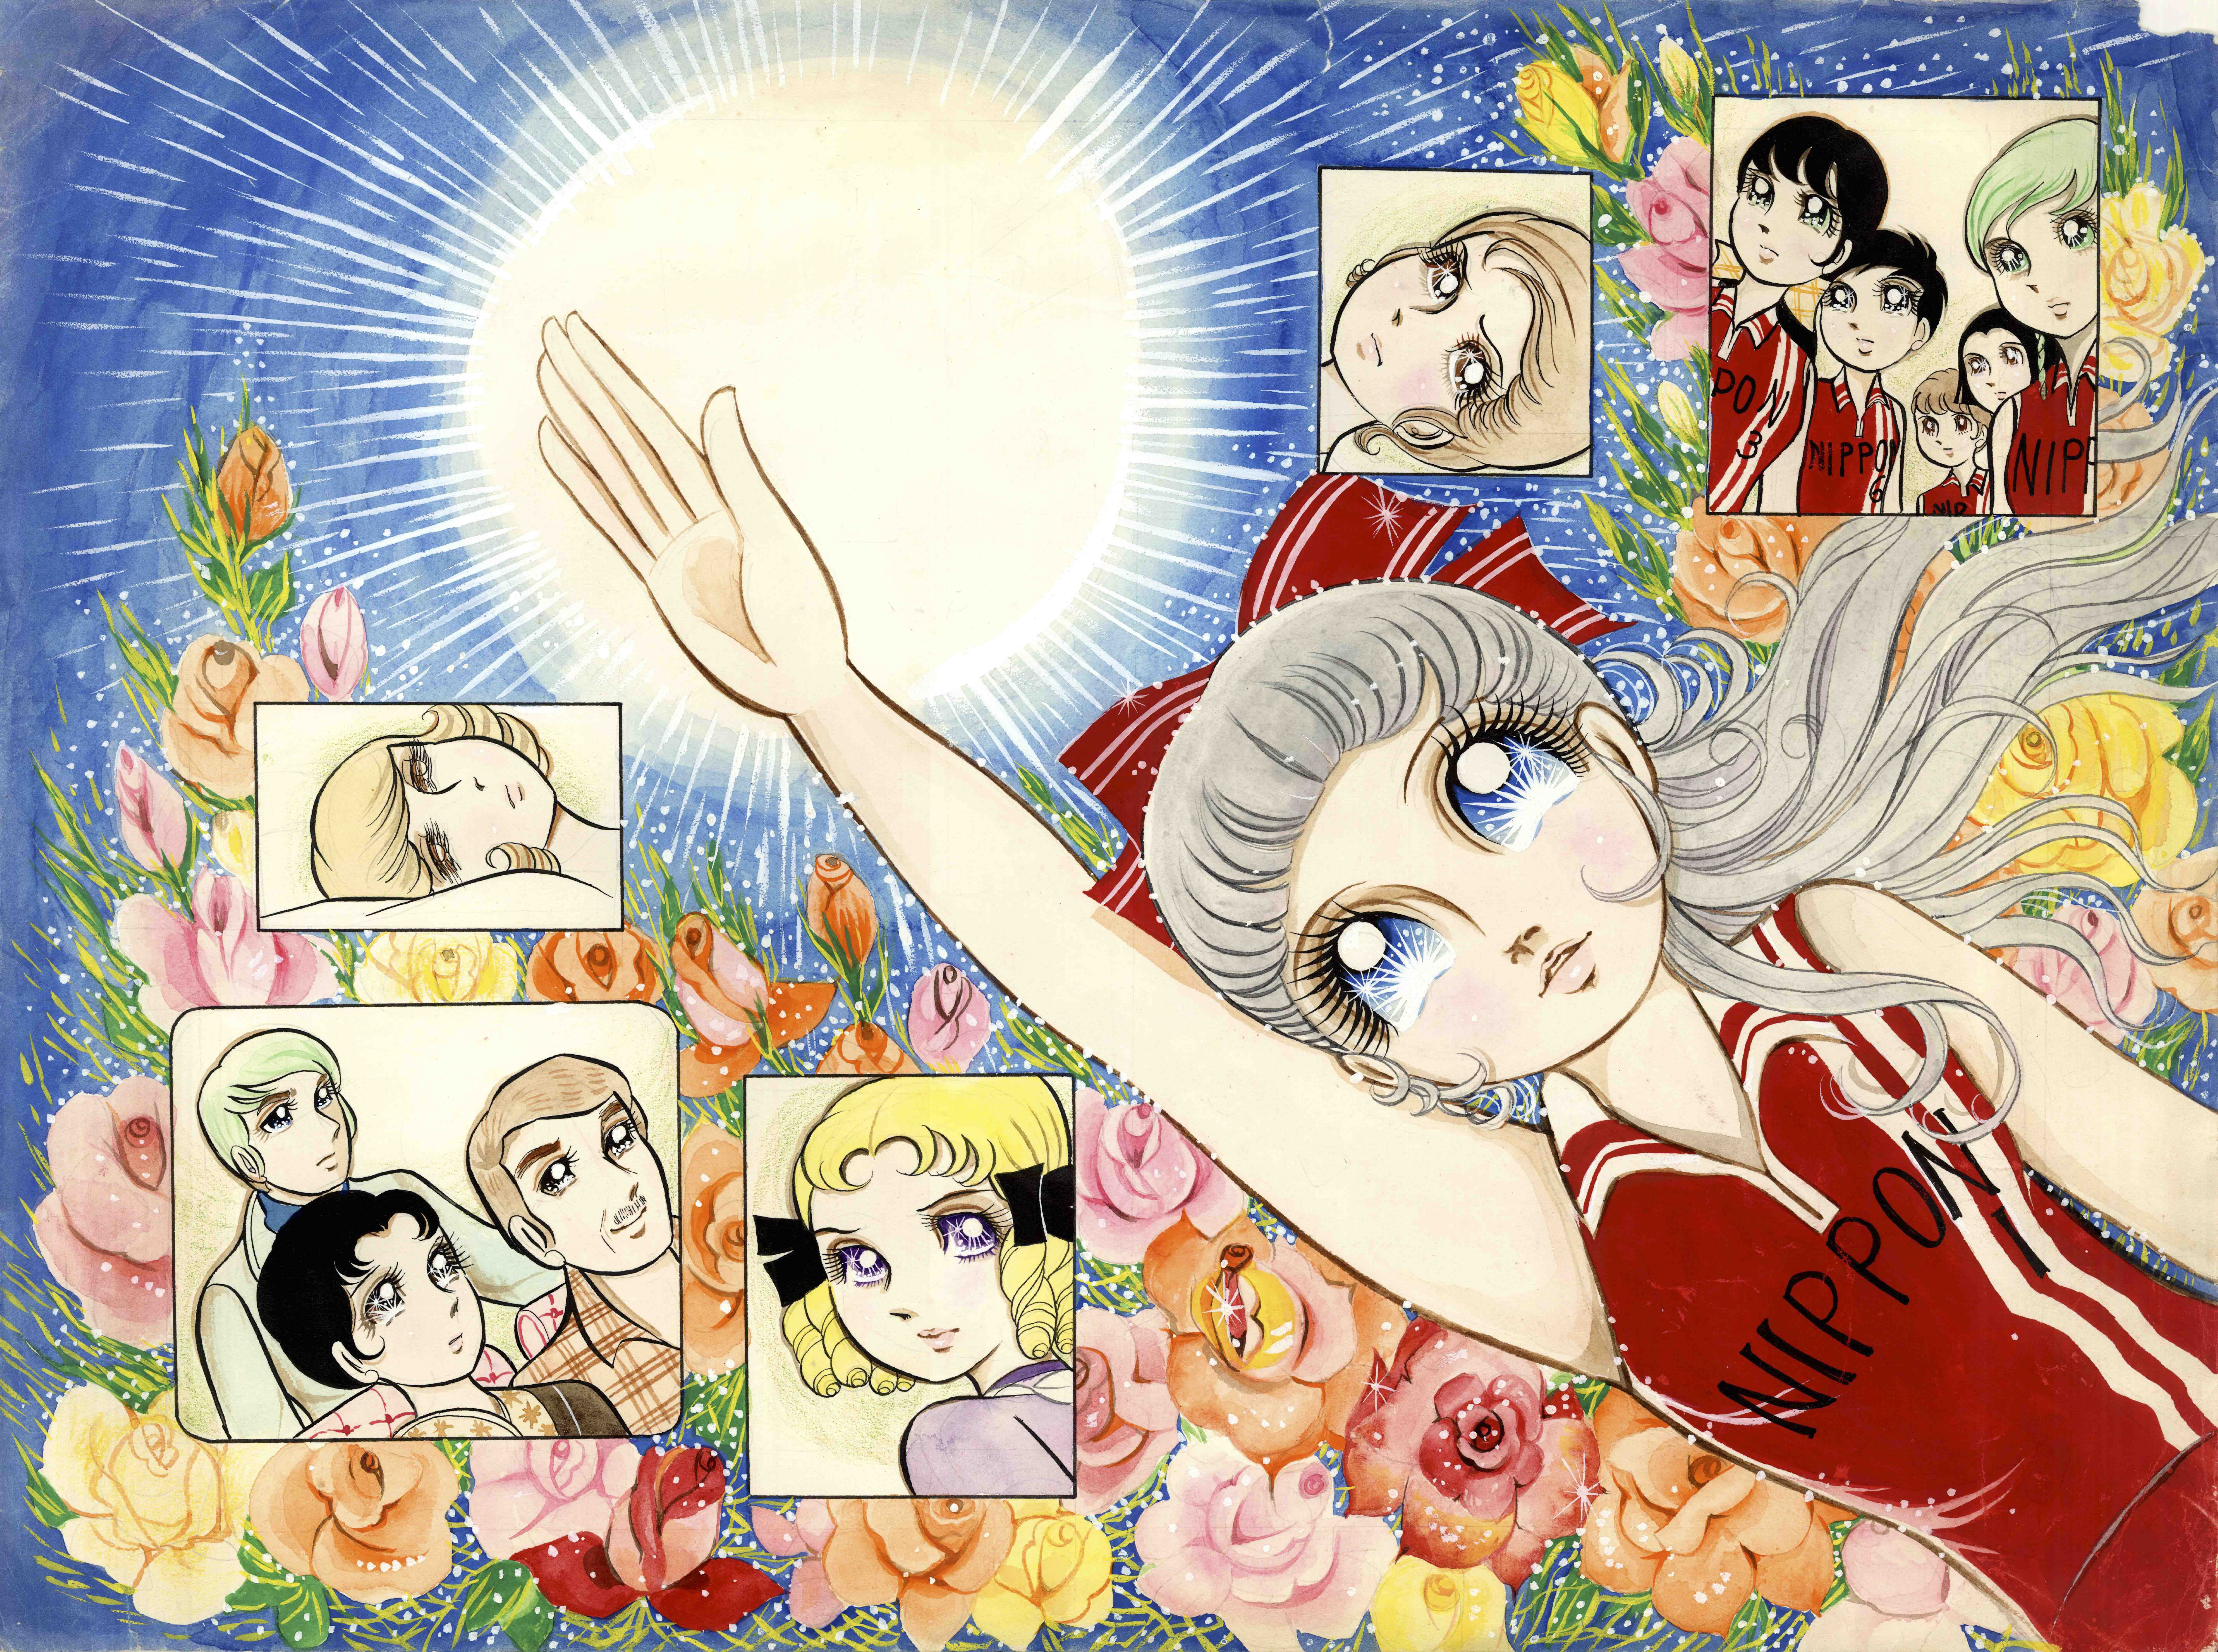 Japanese manga drawing shown in exhibition